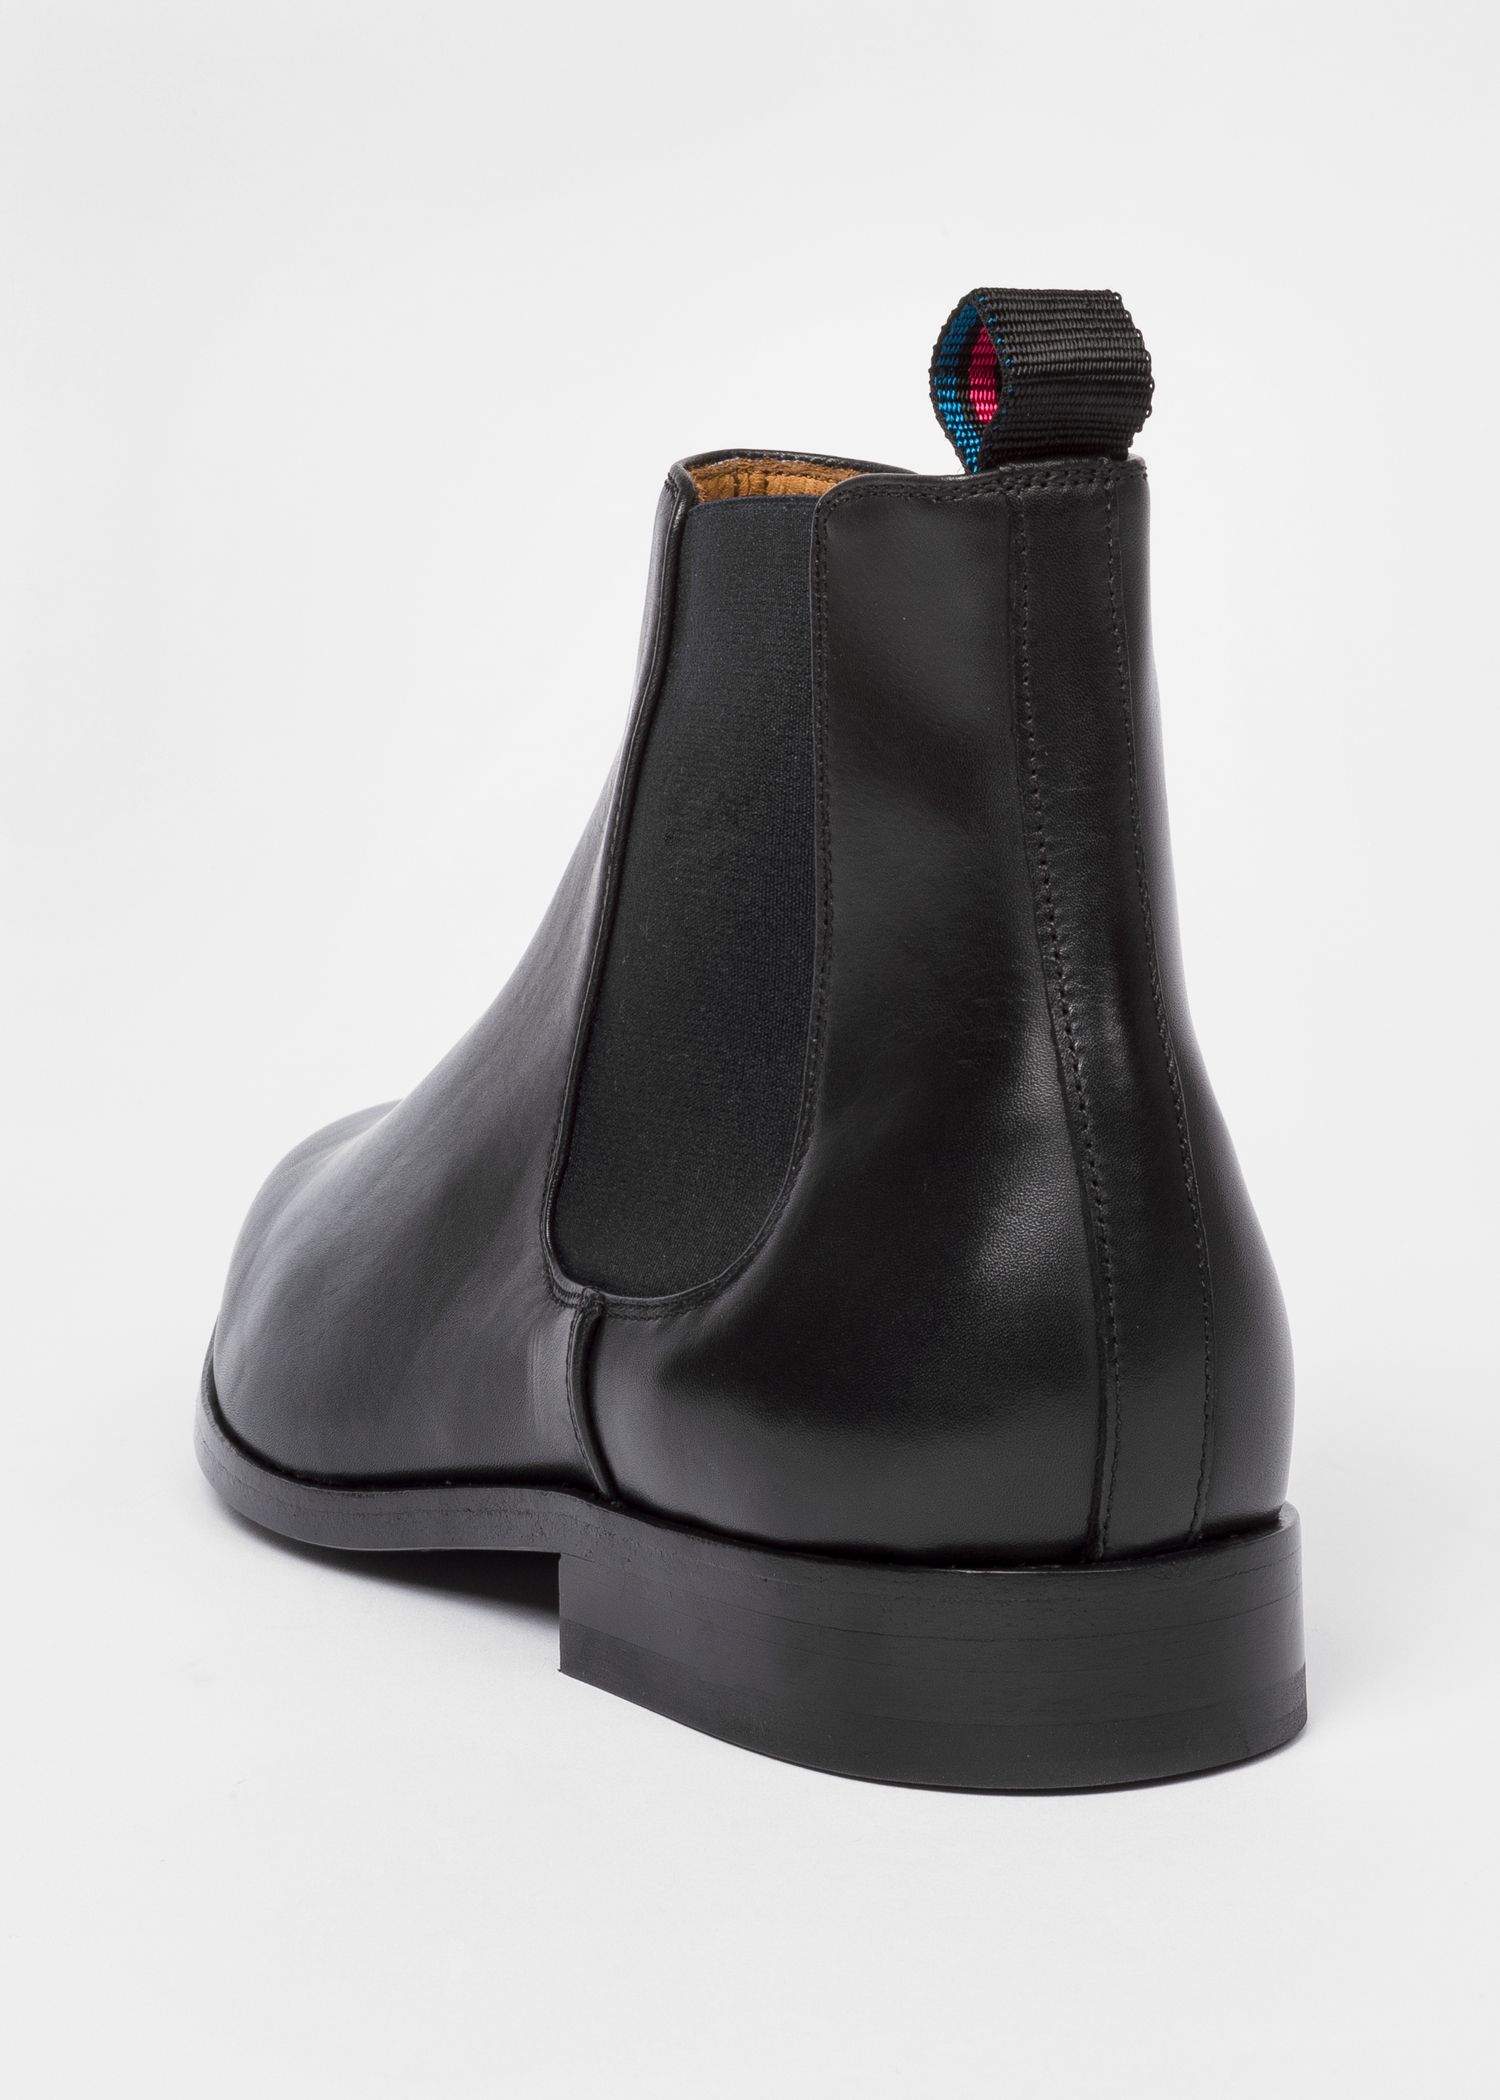 Men's Black Smooth Calf Leather 'Gerald' Chelsea Boots